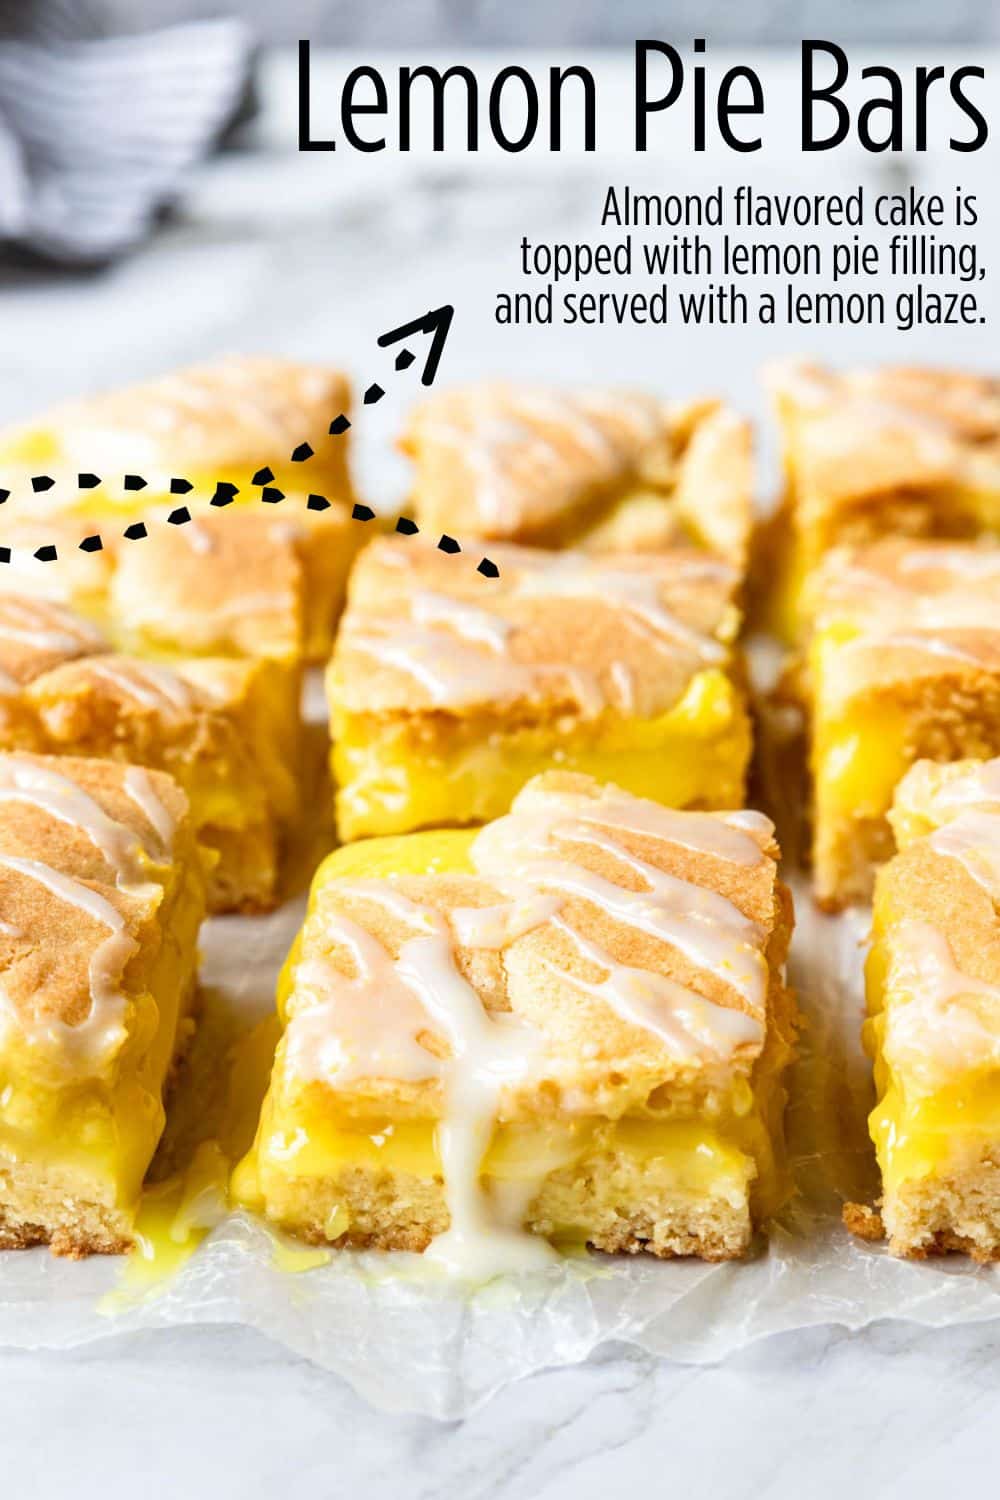 Pinterest image for lemon pie bars with text overlay